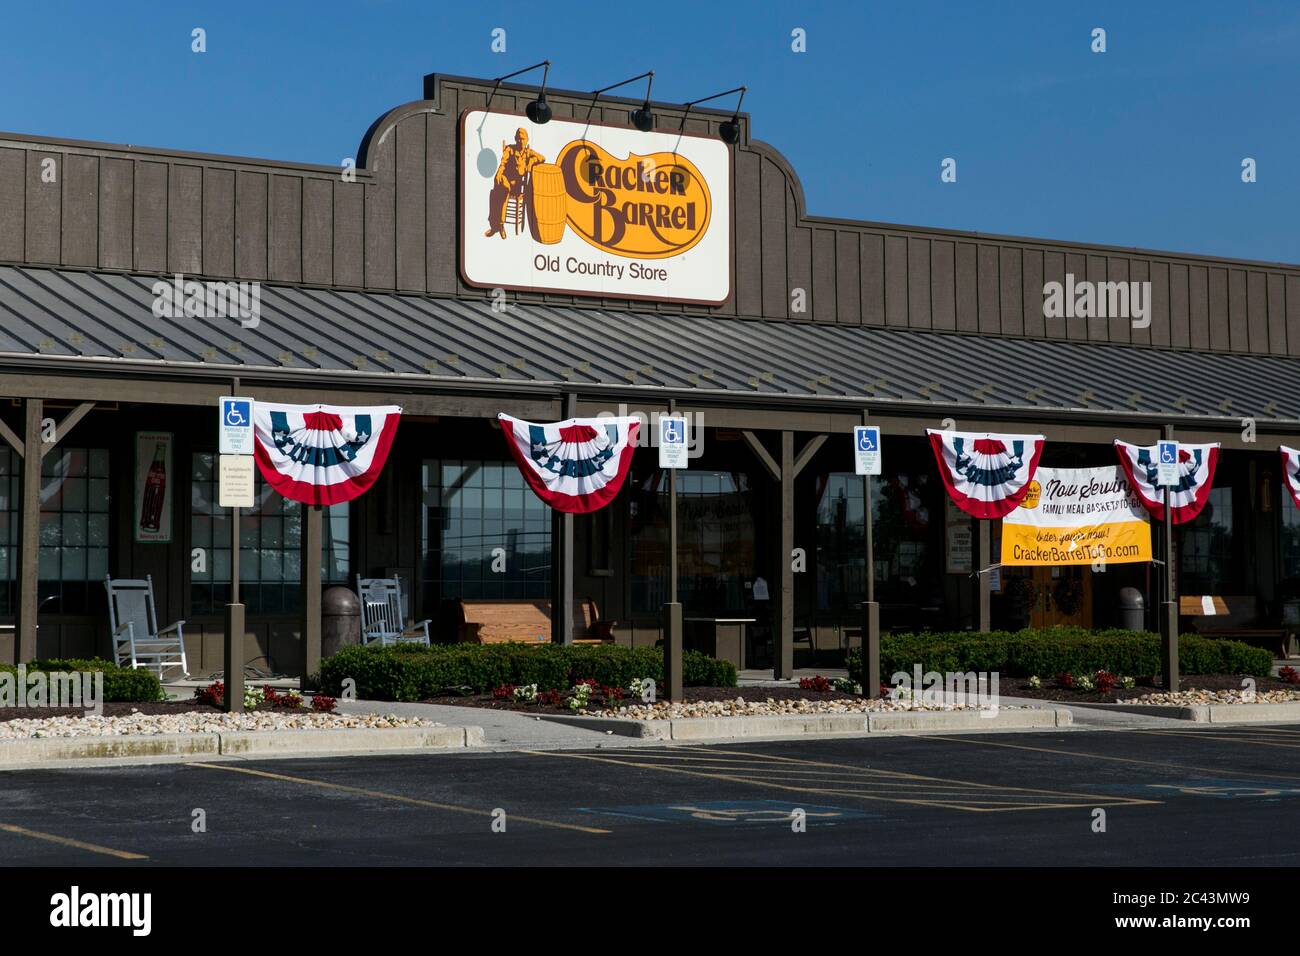 A logo sign outside of a Cracker Barrel Old Country Store restaurant location in Hagerstown, Maryland on June 10, 2020. Stock Photo